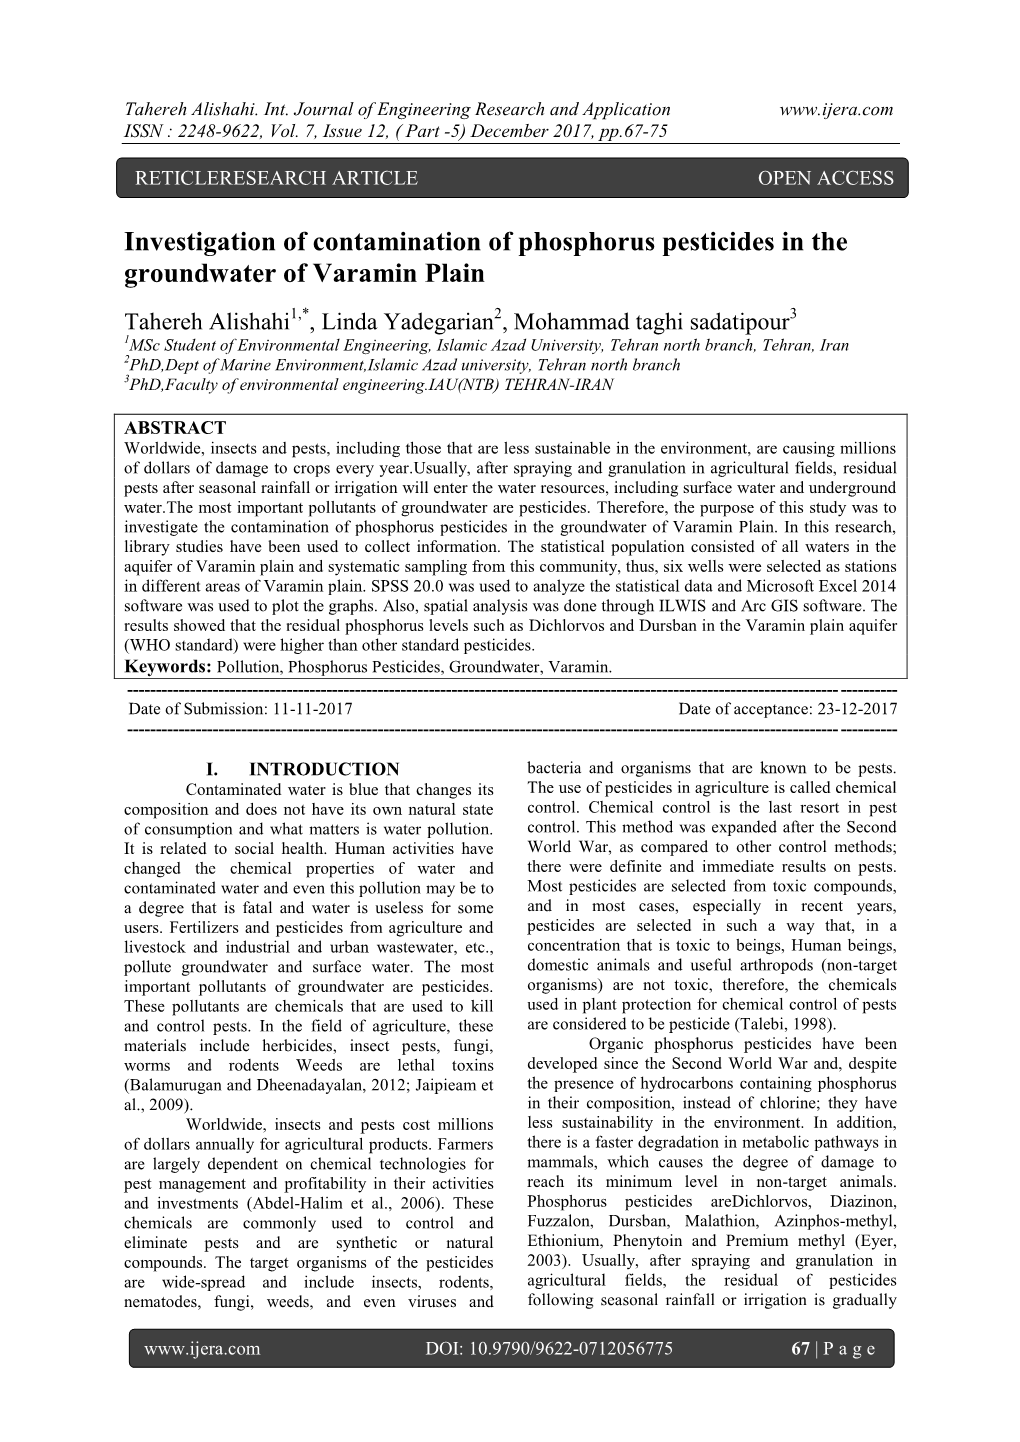 Investigation of Contamination of Phosphorus Pesticides in the Groundwater of Varamin Plain